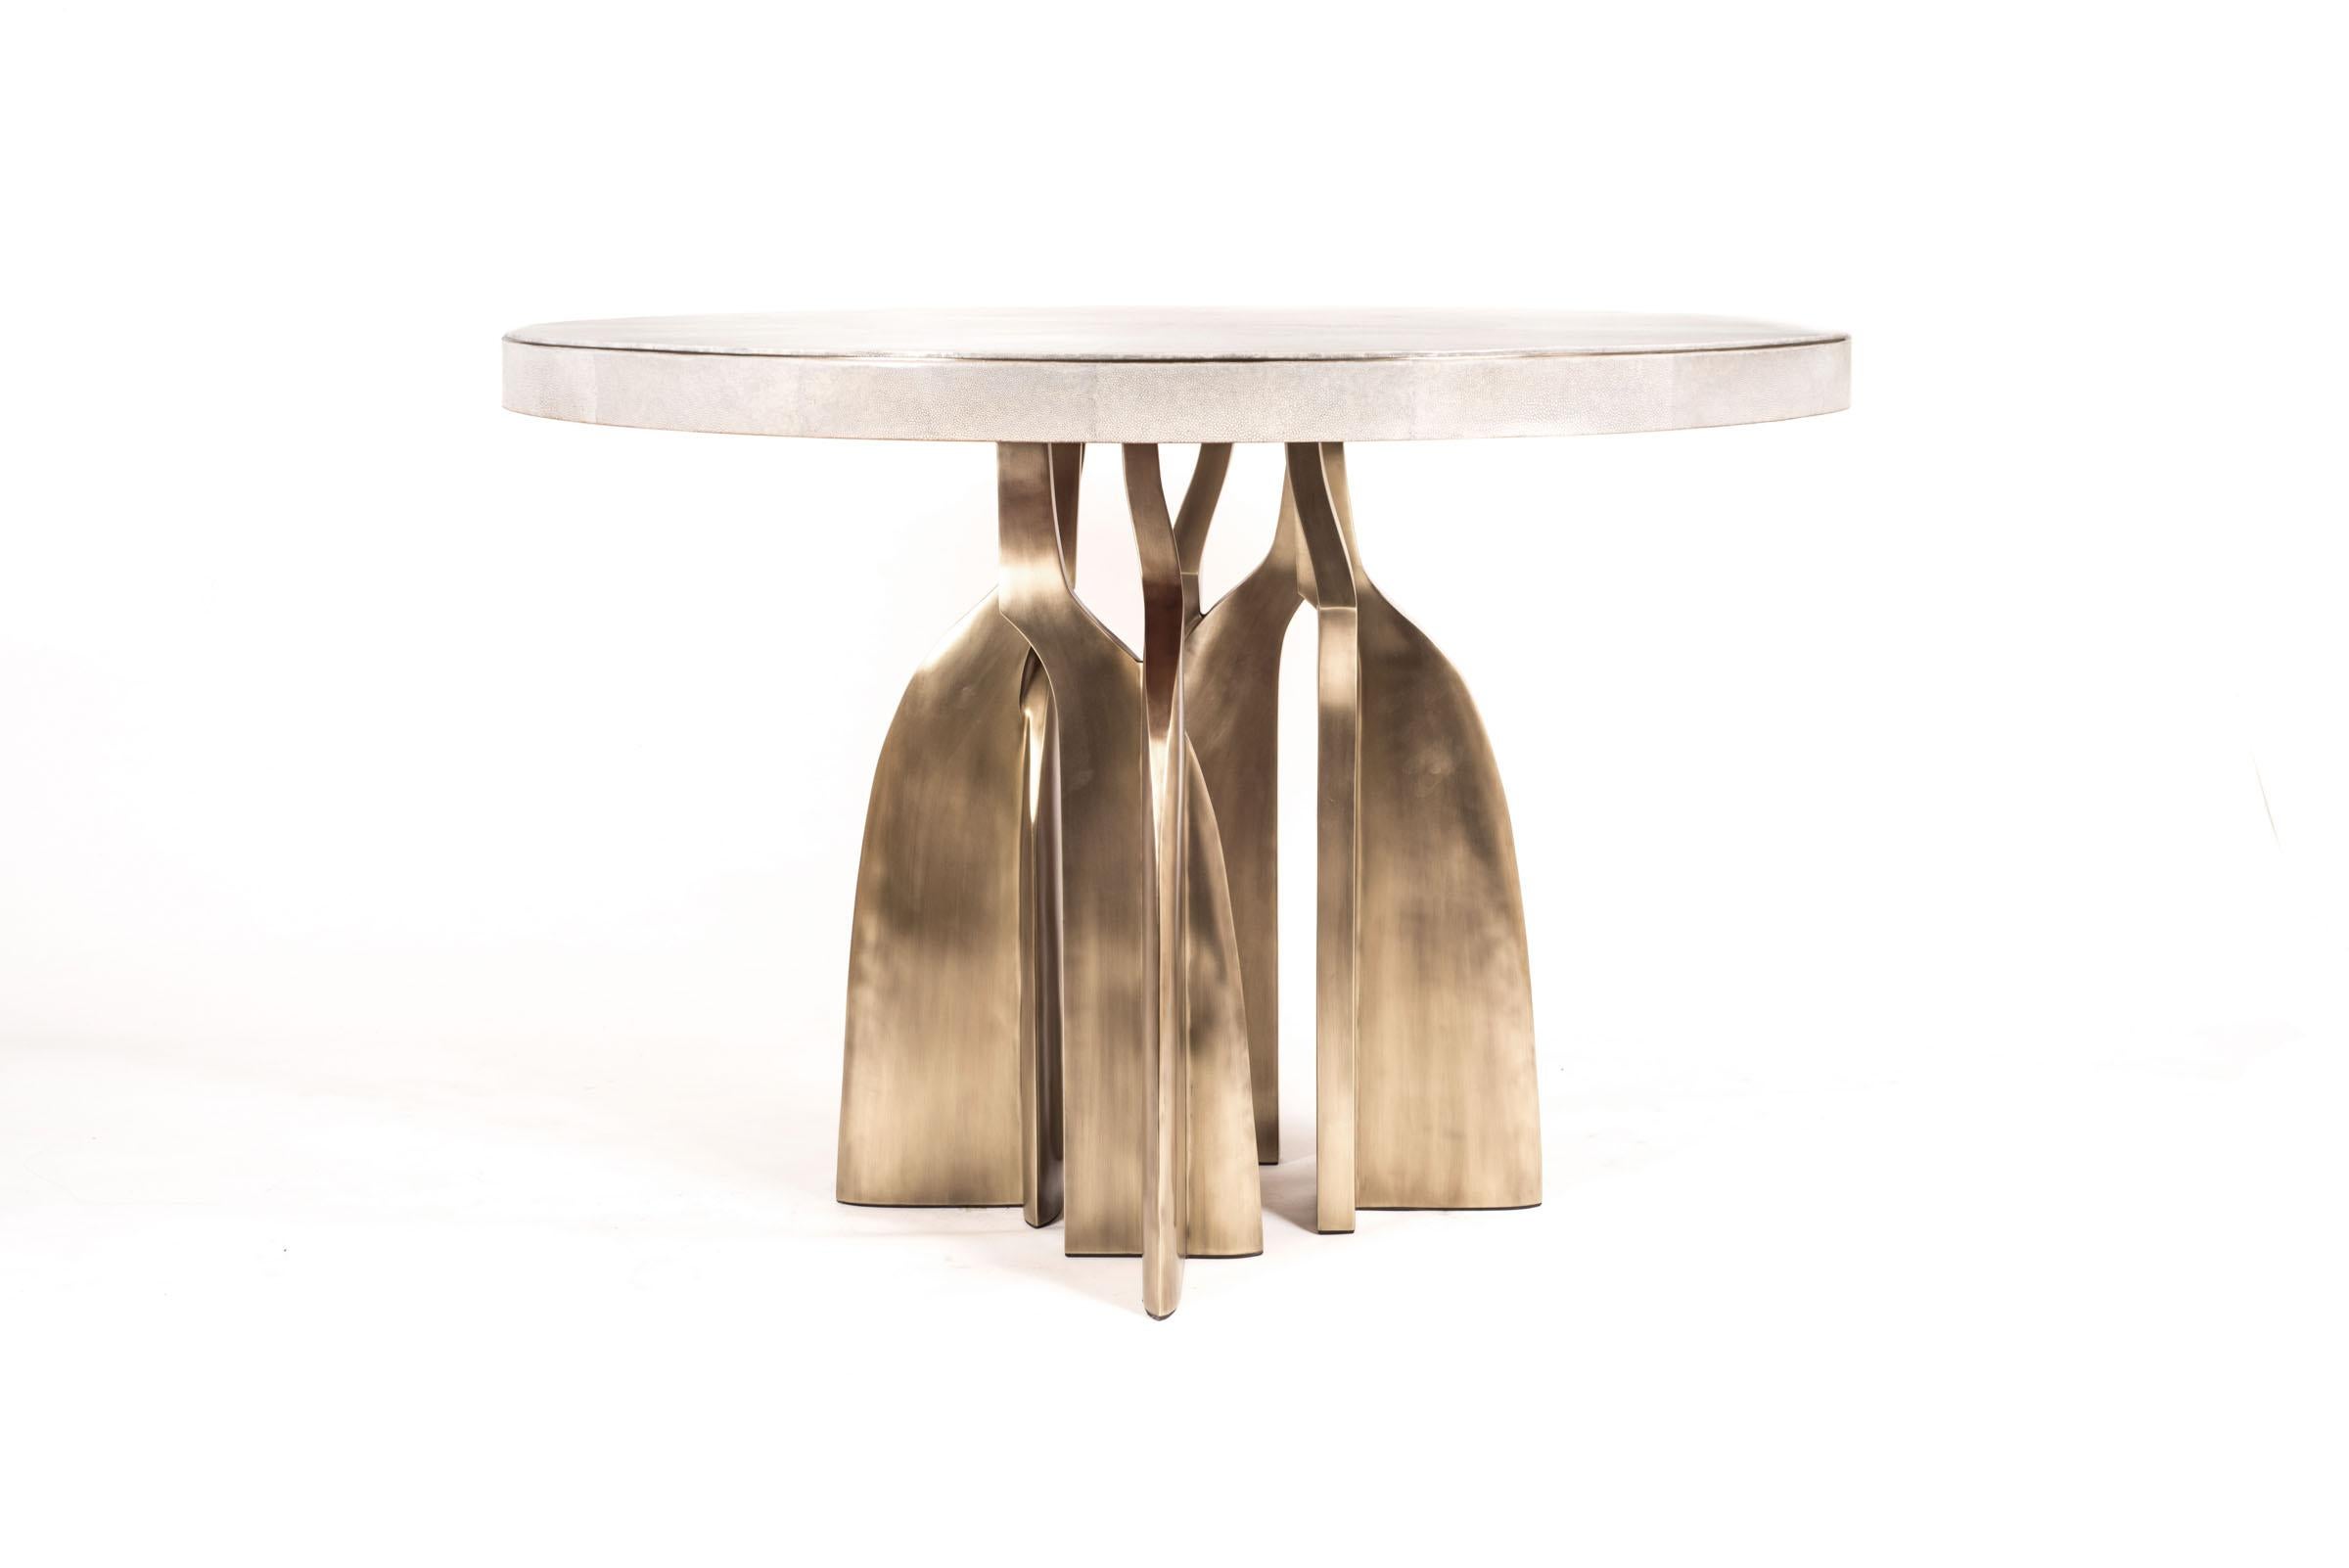 Art Deco Shagreen Breakfast Table with Sculptural Bronze-Patina Brass Legs by Kifu, Paris For Sale